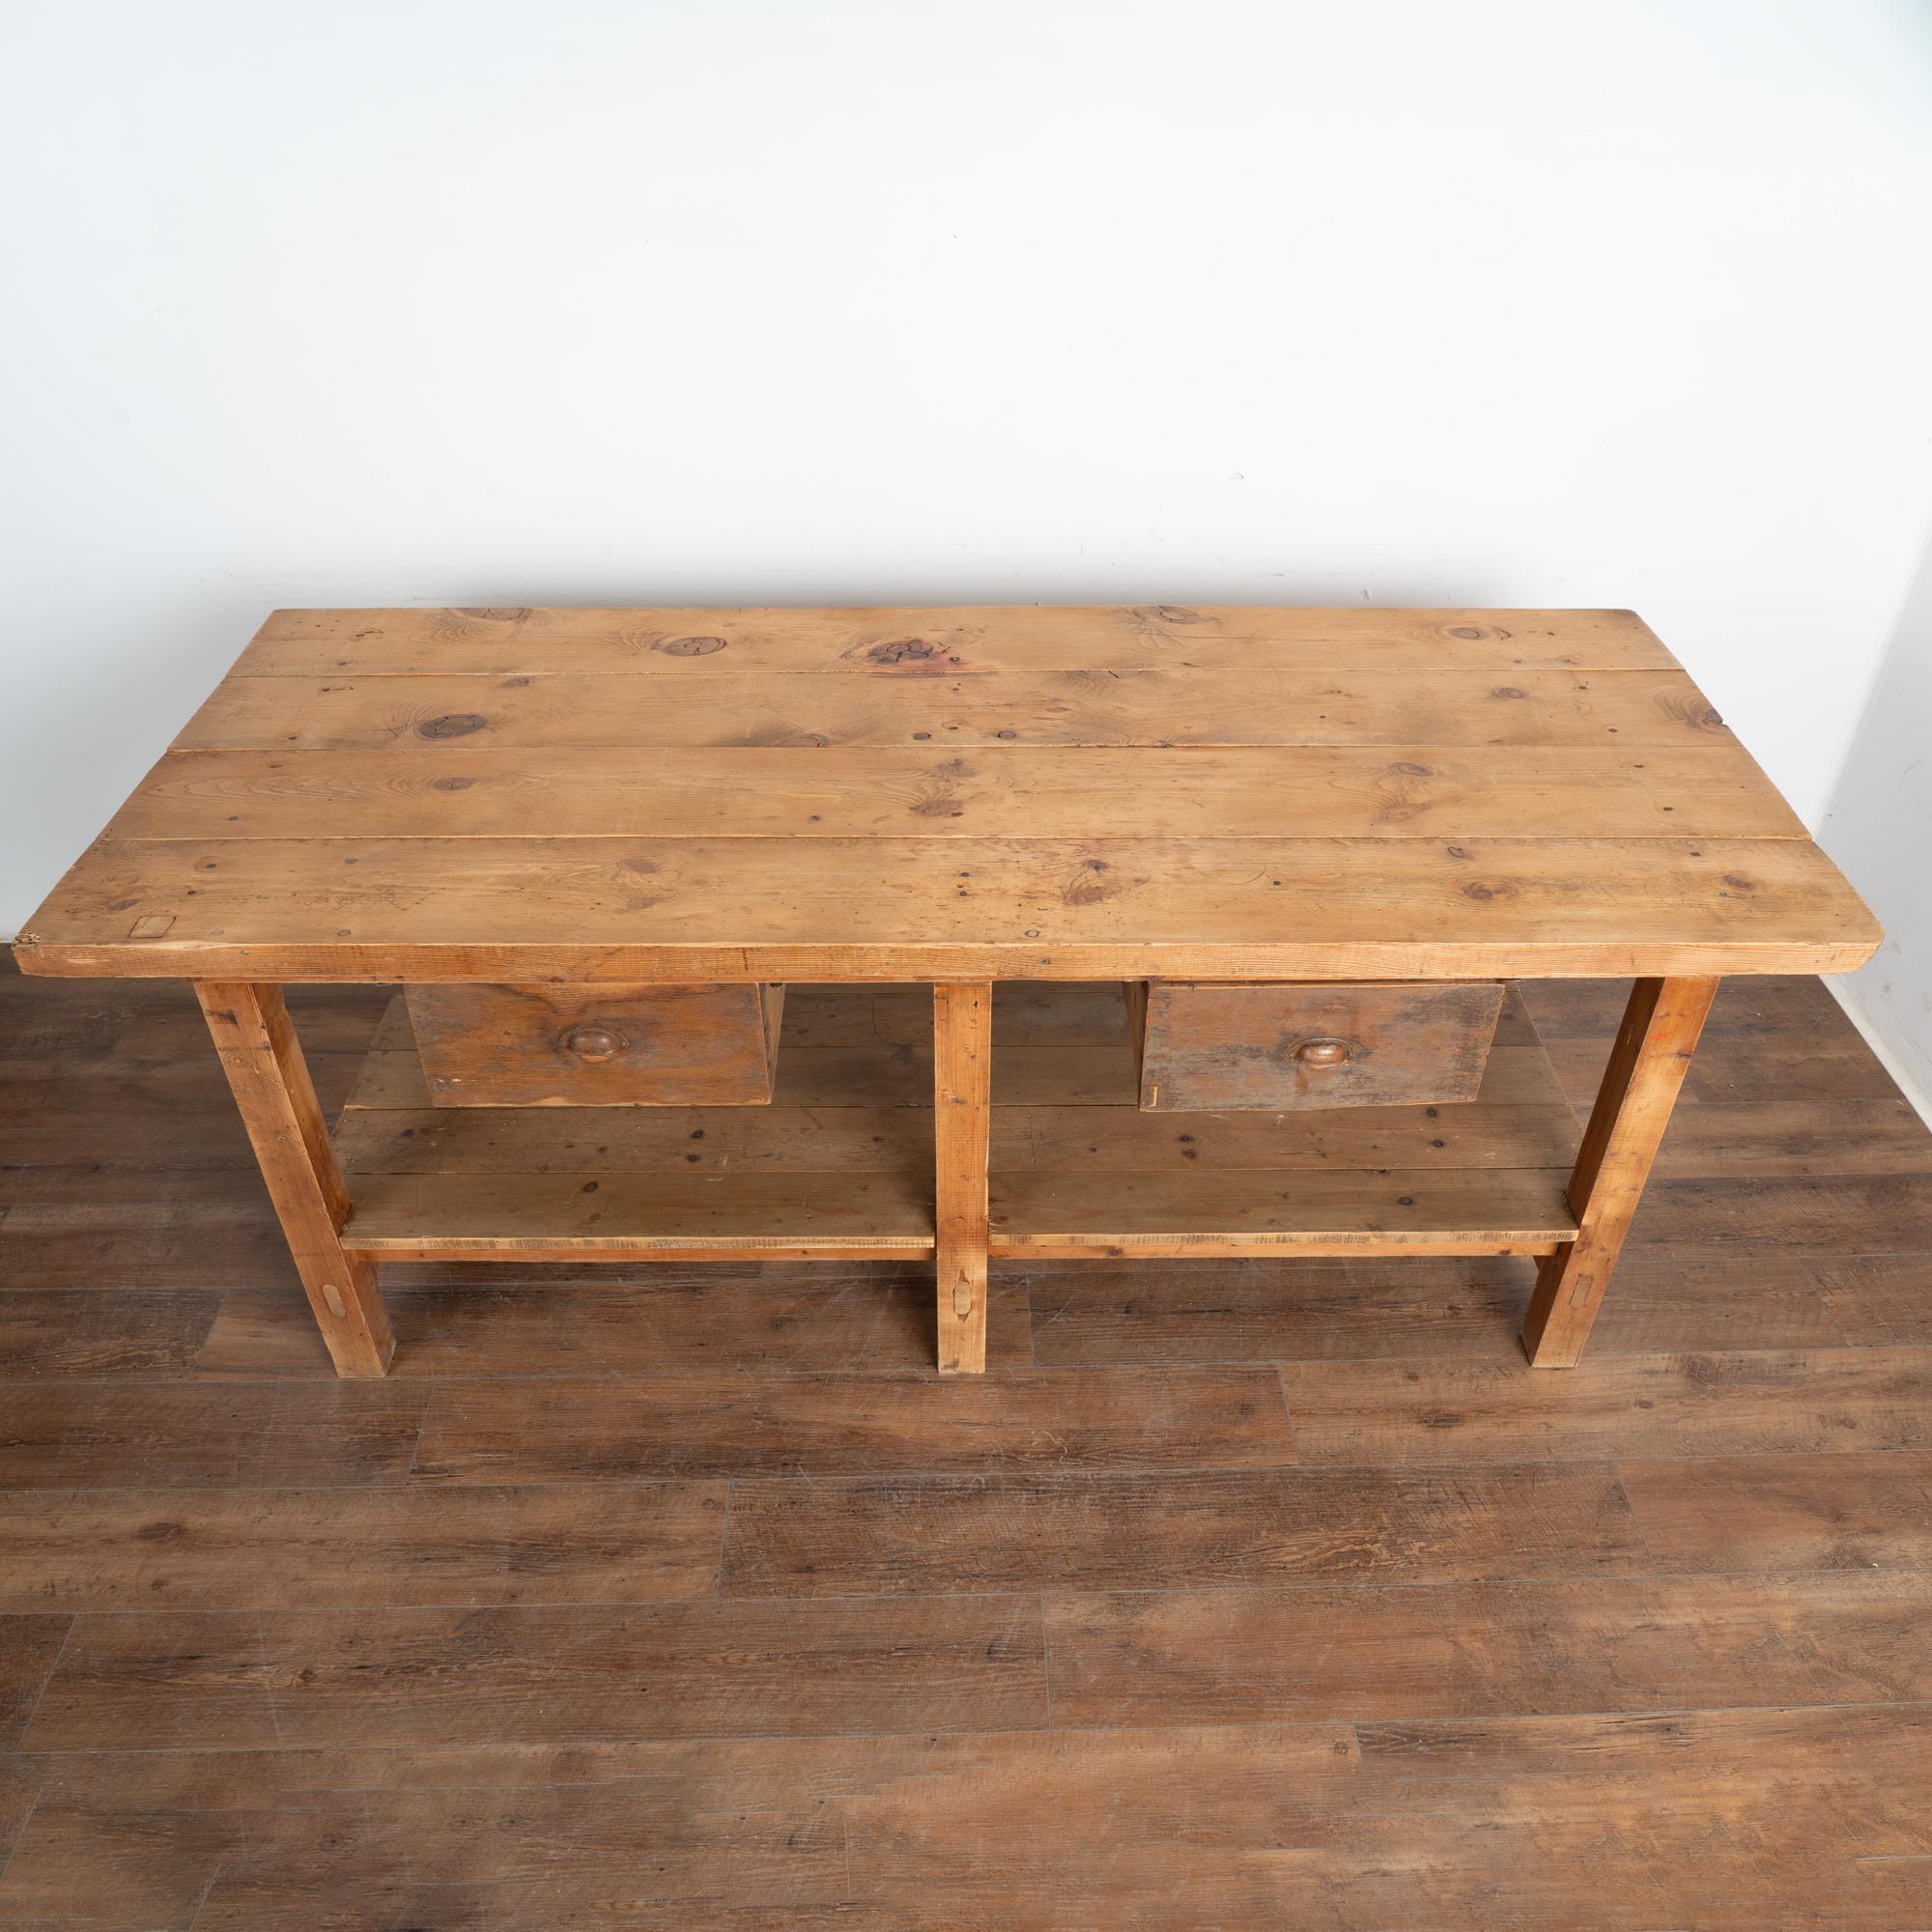 Wood Rustic Work Table With Two Drawers and Shelf, Kitchen Island circa 1920